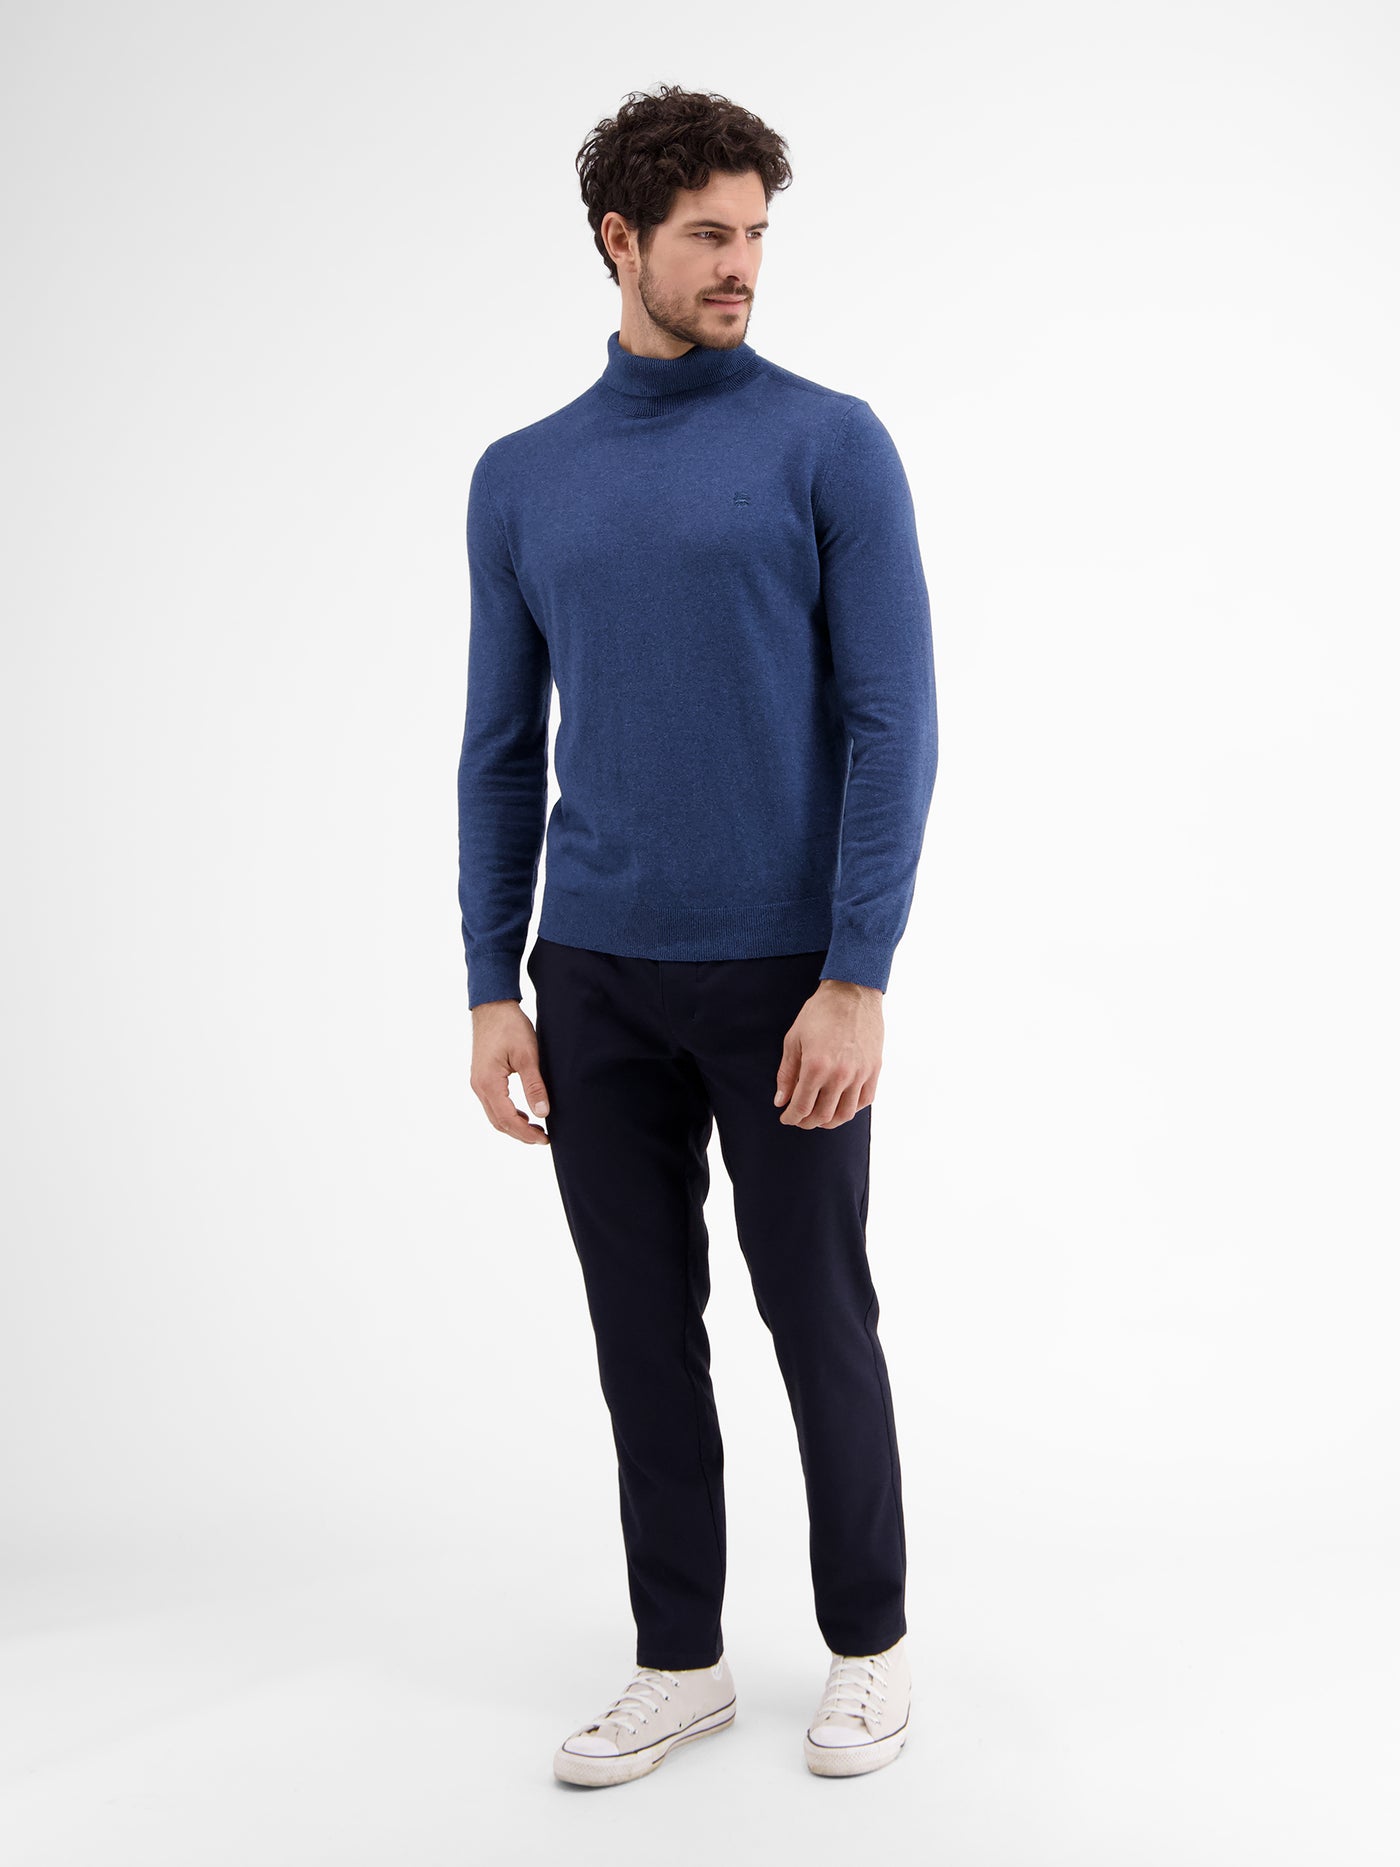 Turtleneck sweater in flat knit quality